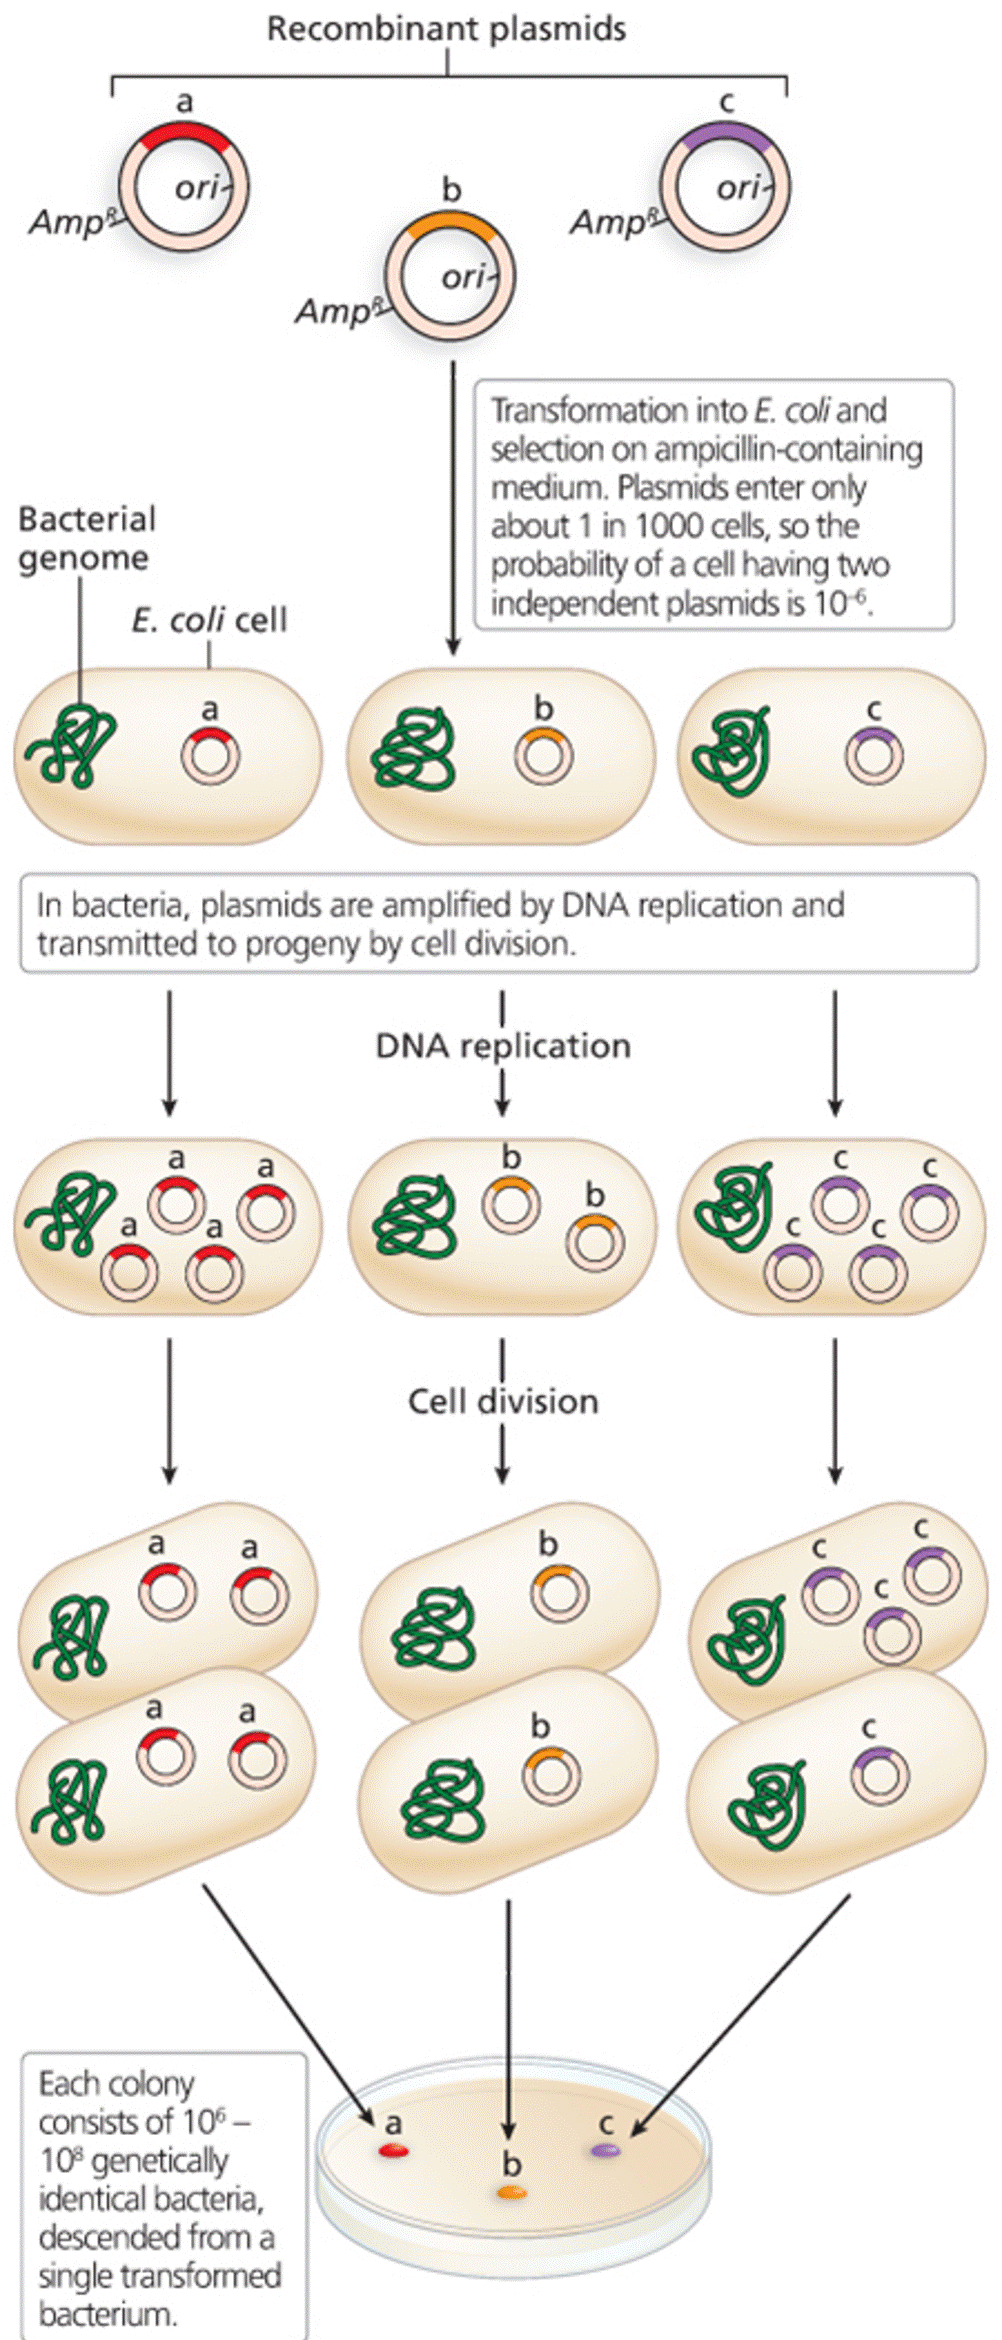 Amplification of recombinant DNA molecules in bacteria